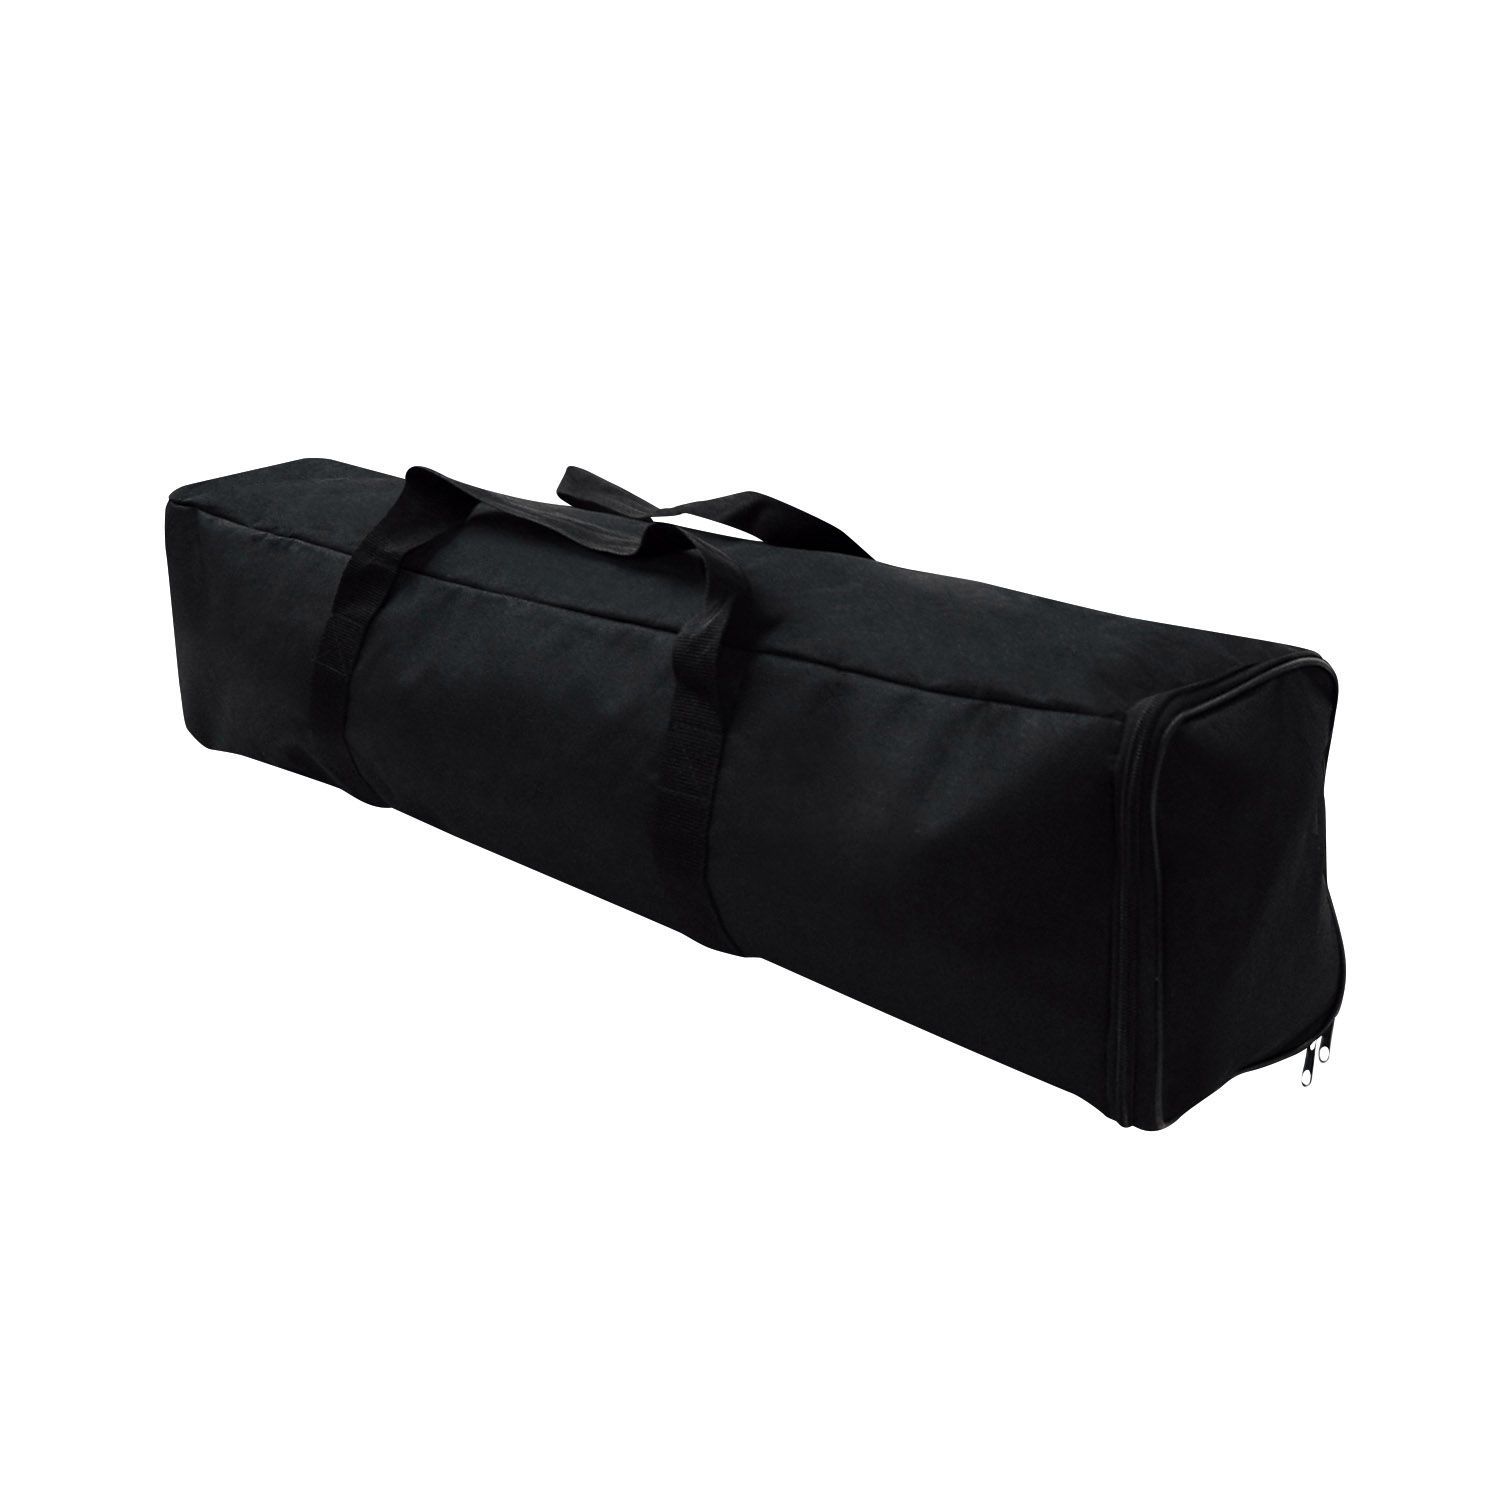 37.5" Soft Carry Case for Fabric Displays